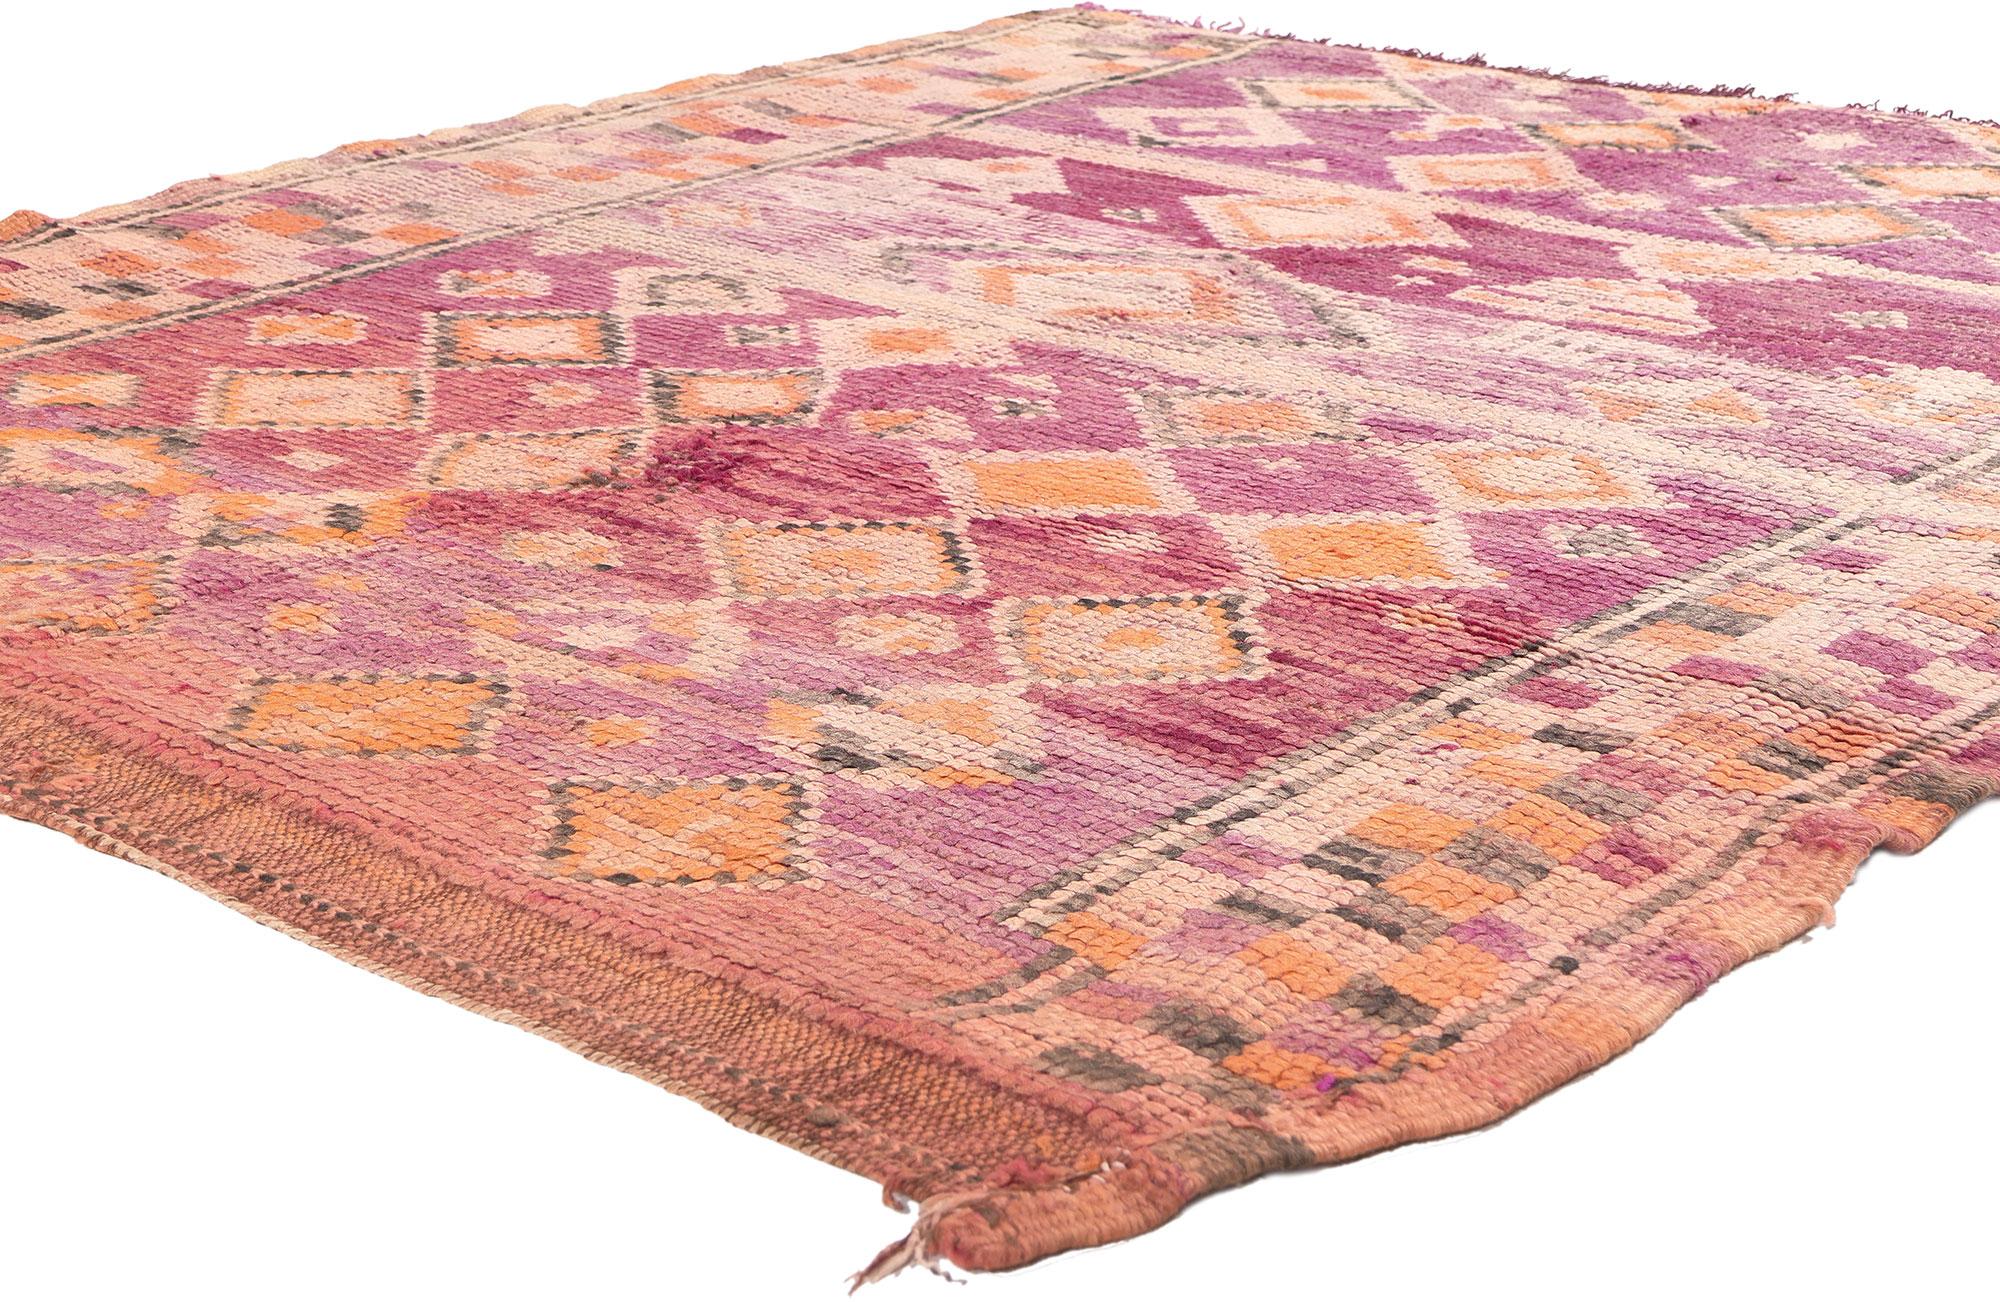 20479 Vintage Boujad Moroccan Rug, 05’05 x 05’10. 
In this hand-knotted wool vintage Boujad Moroccan rug, the essence of a cozy nomad converges with the vibrant rhythm of a bohemian rhapsody. The intrinsic diamond design and the Indian Summer color